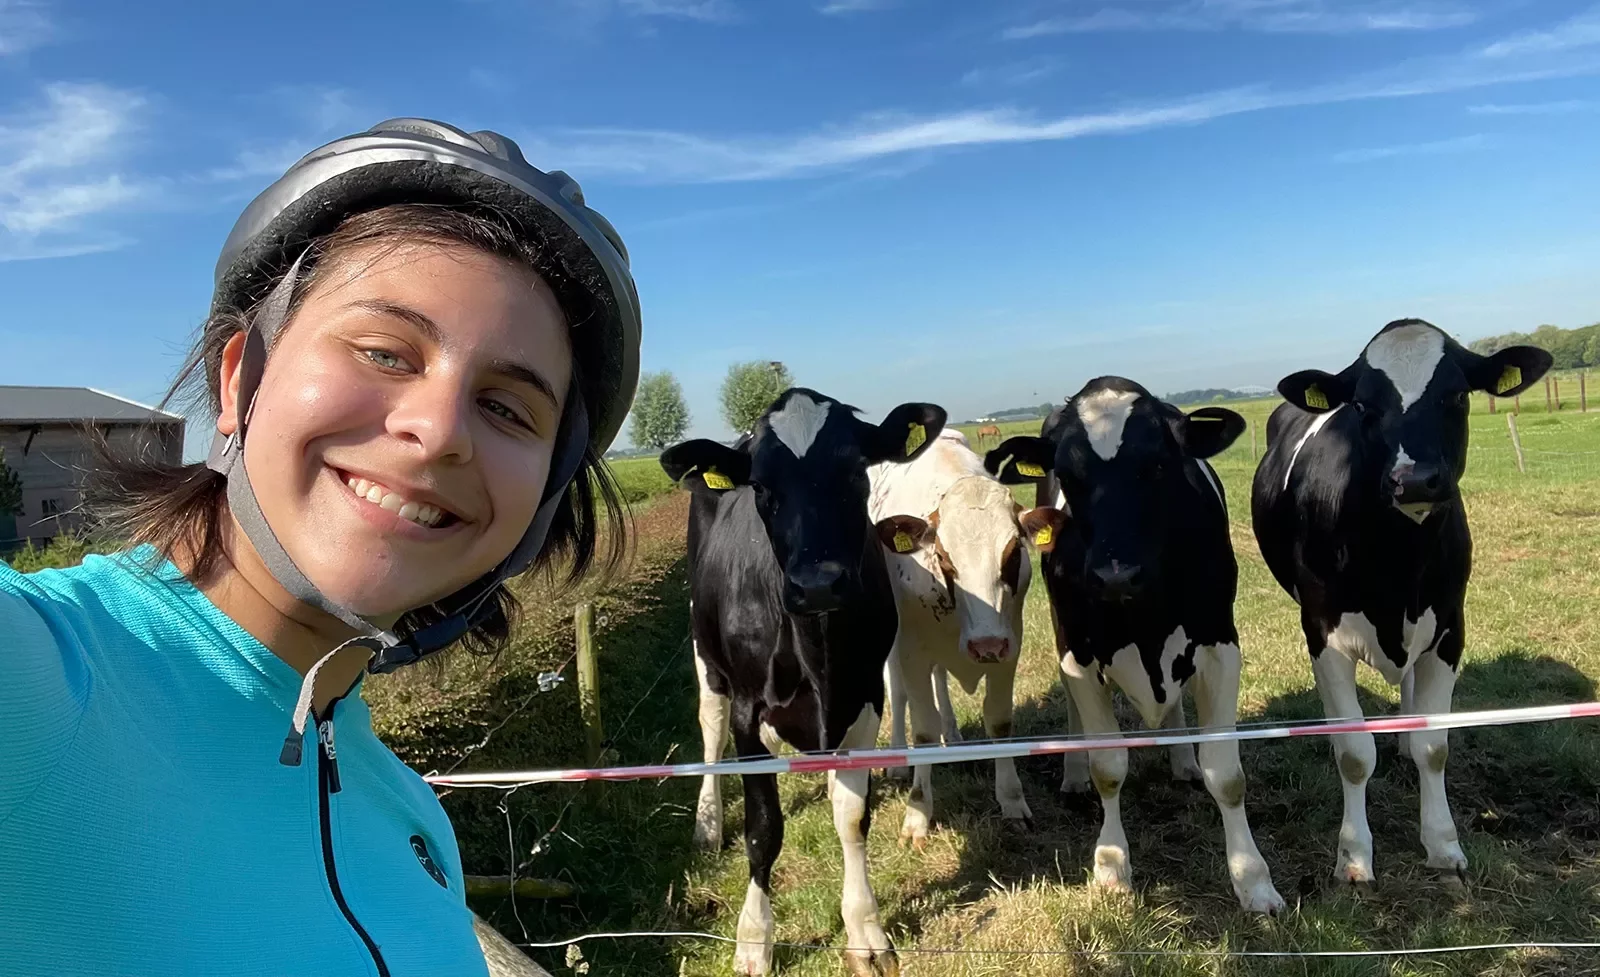 Selfie with cows